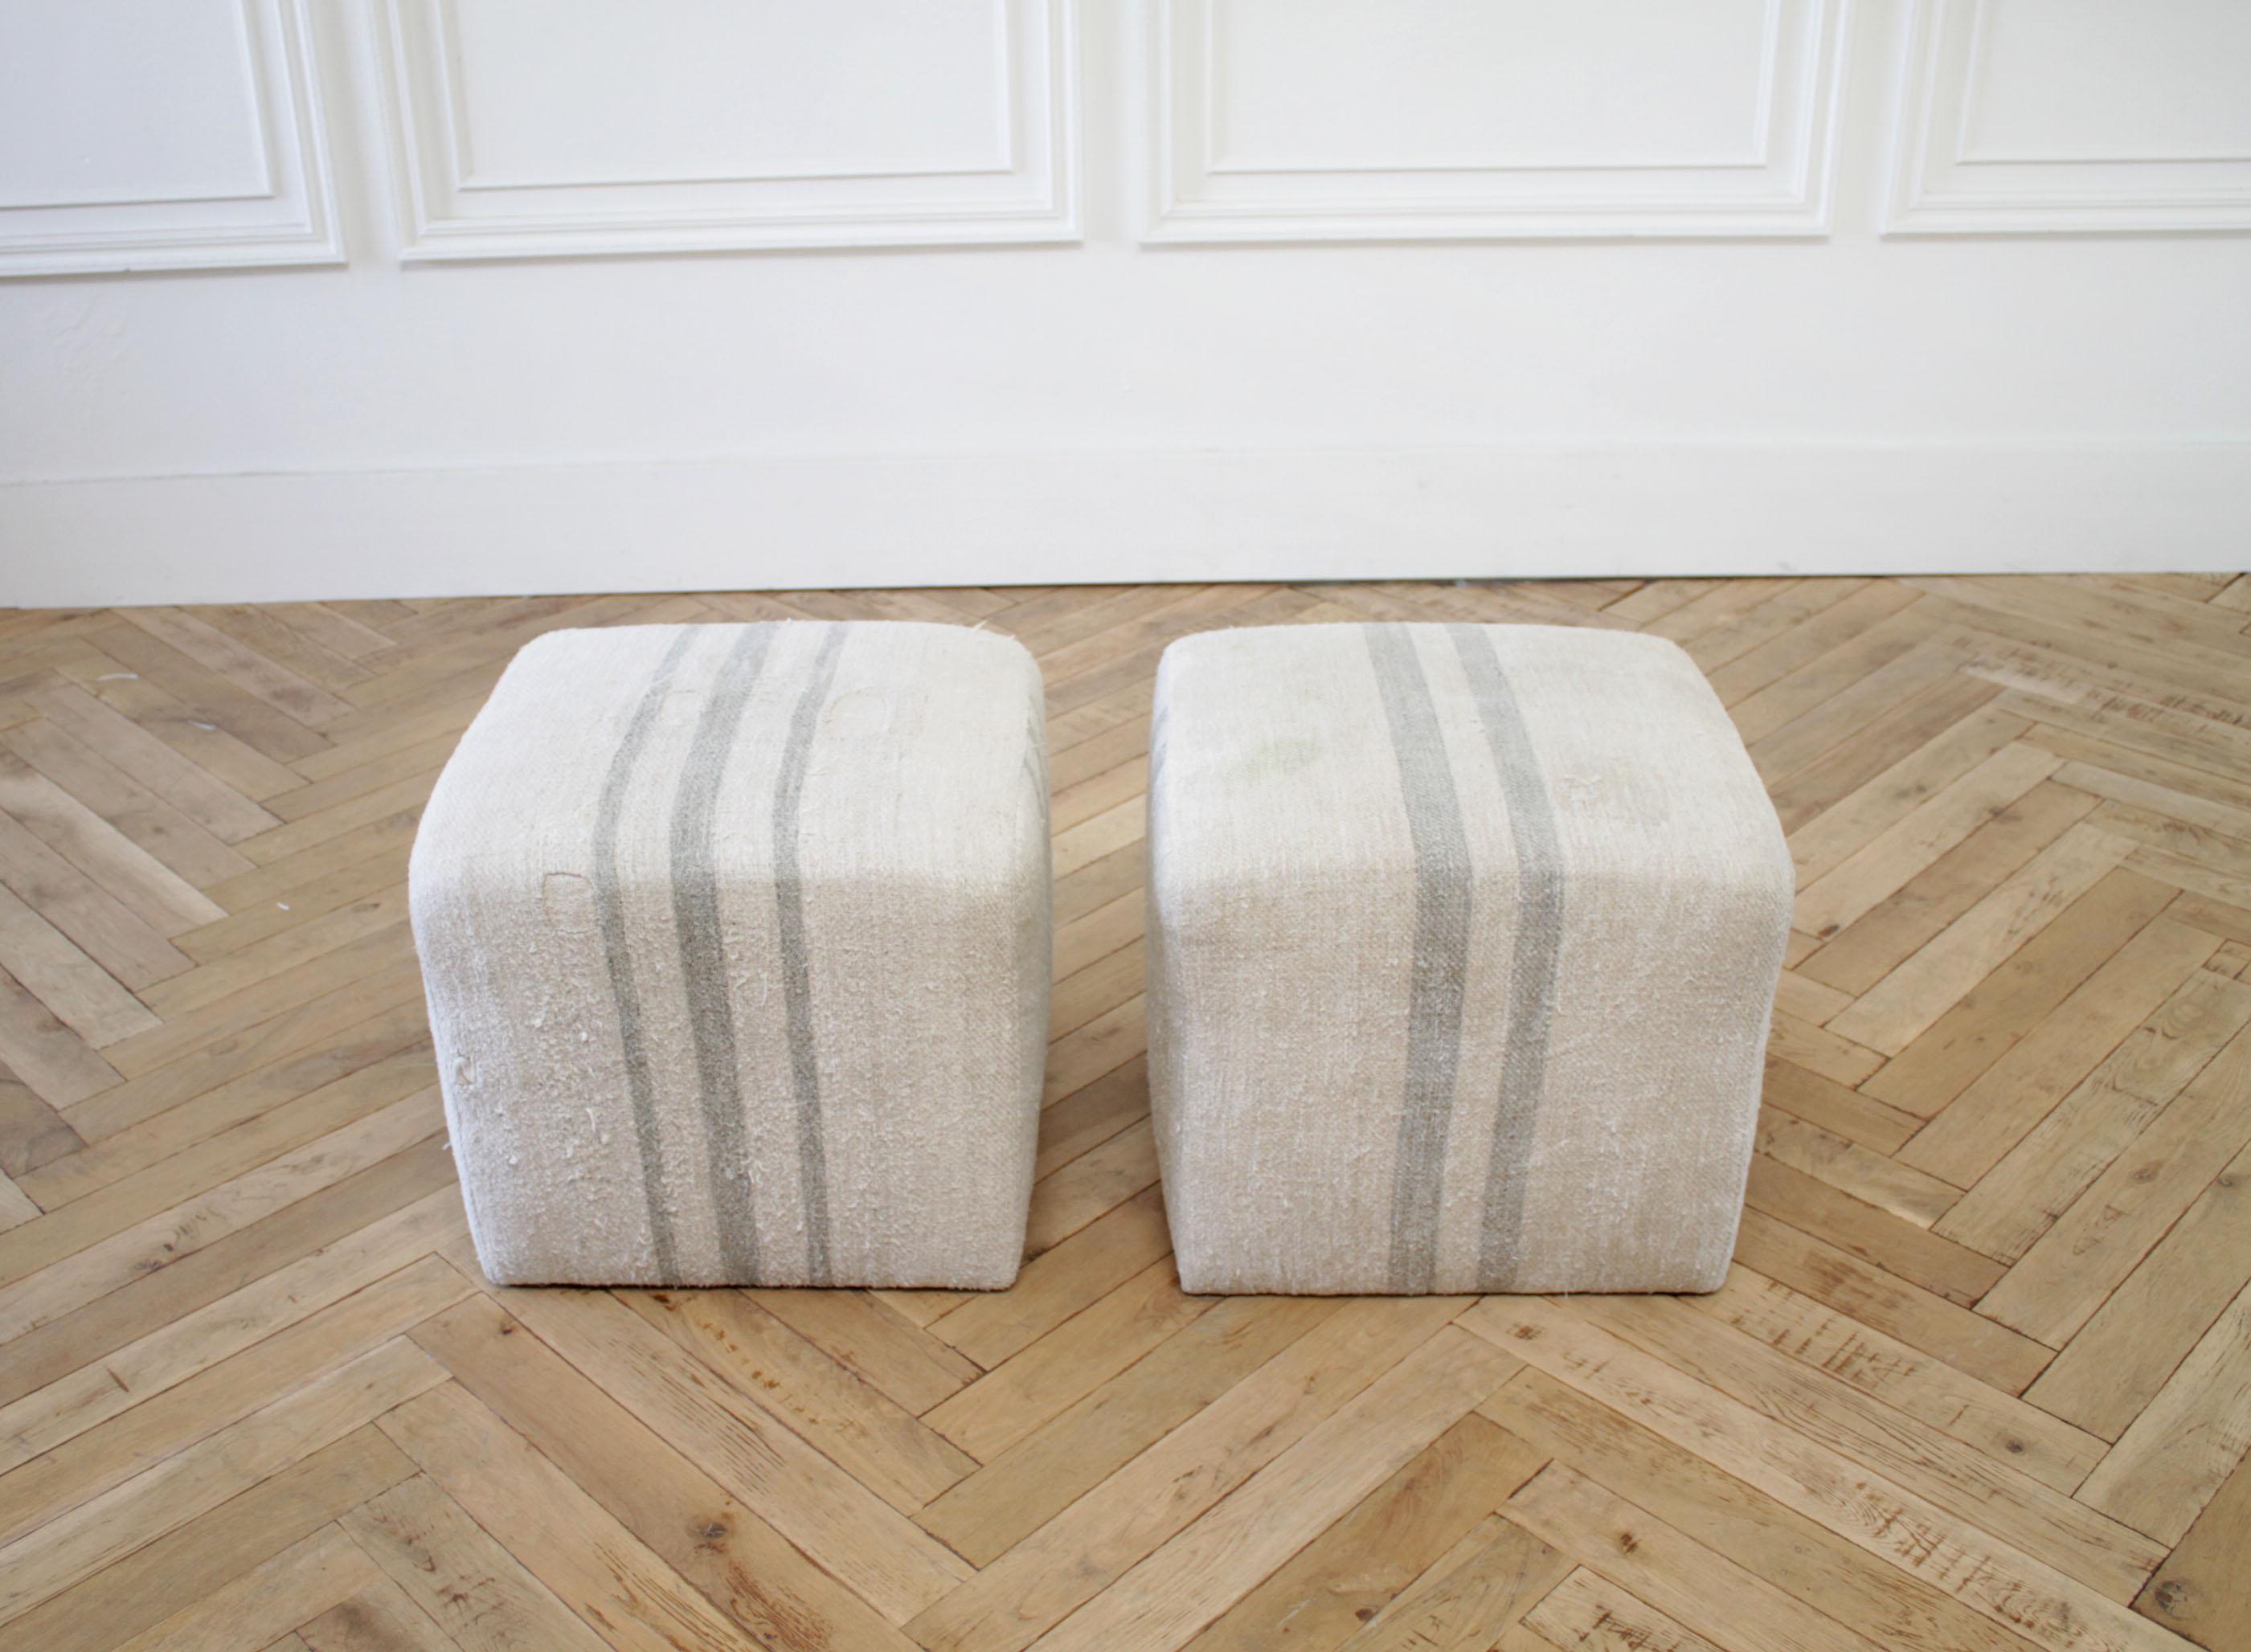 Pair of grainsack cube ottoman oatmeal color with light seaglass stripe
These have been made with vintage textiles, that may have some discolorations, original patchwork, and or original seams. These antique grain bags were used by farmers to hold